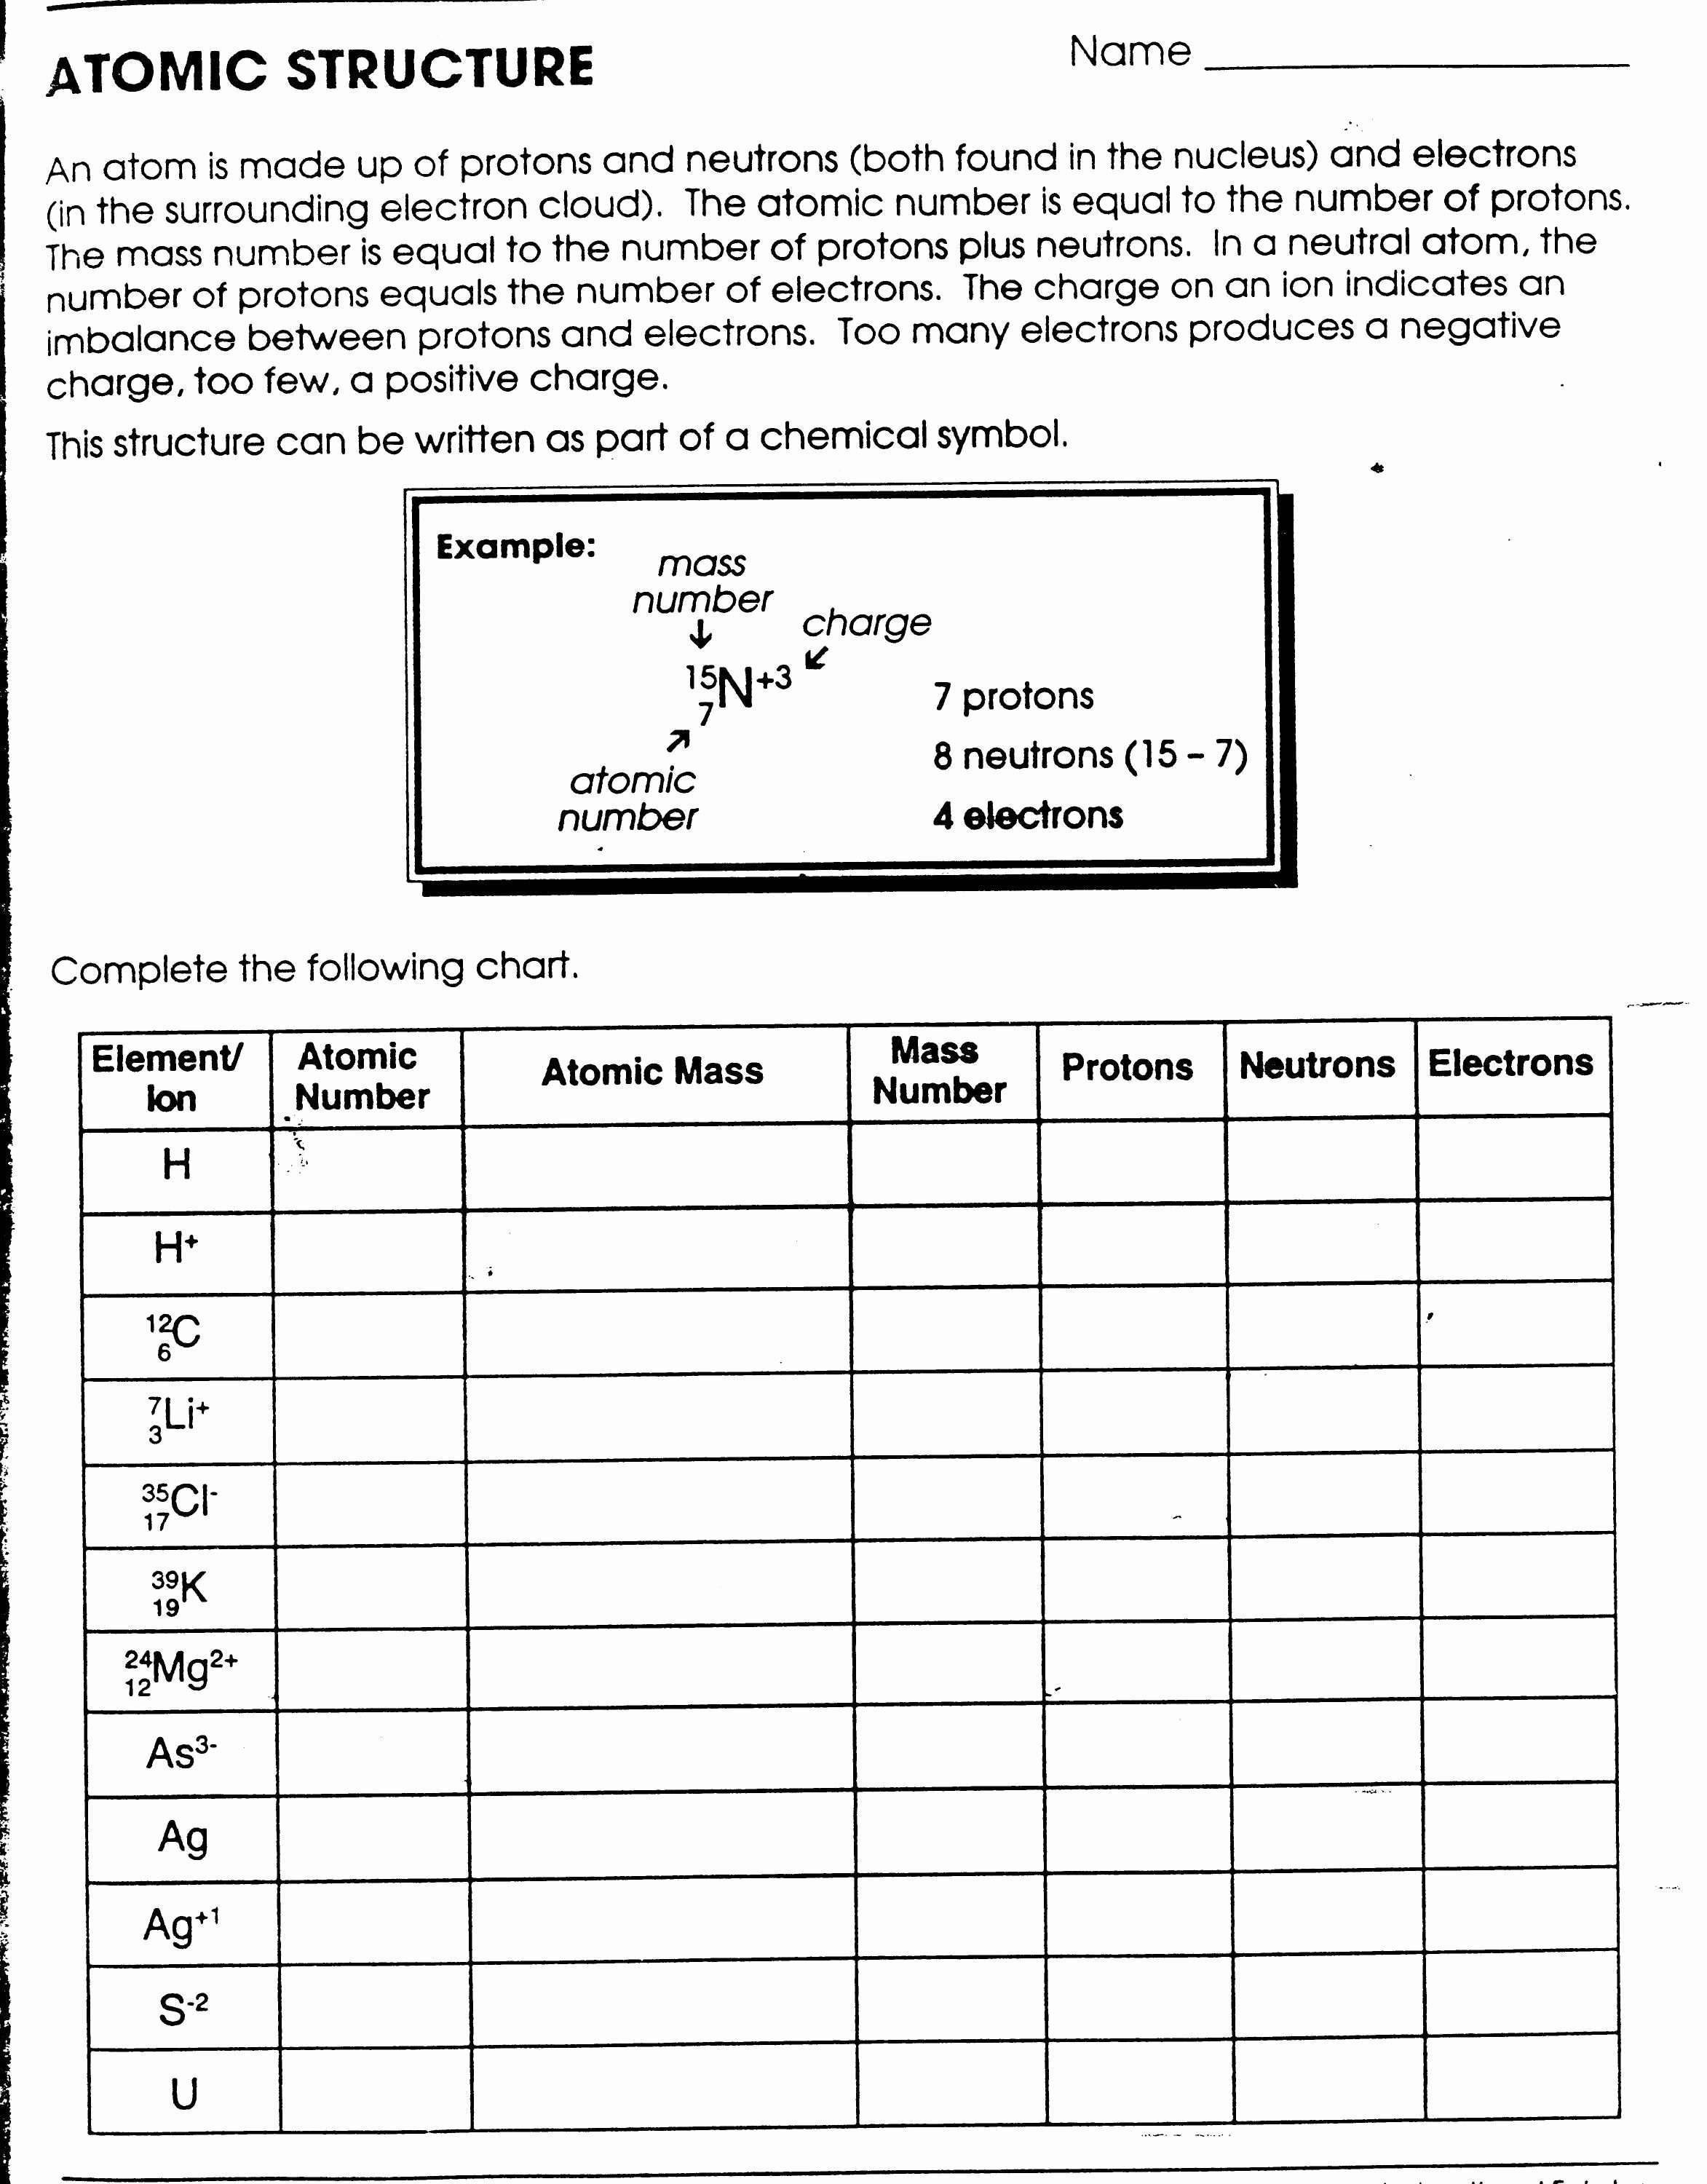 Atomic Structure Worksheet Chemistry Awesome Skills Worksheet Concept Review Section the Development